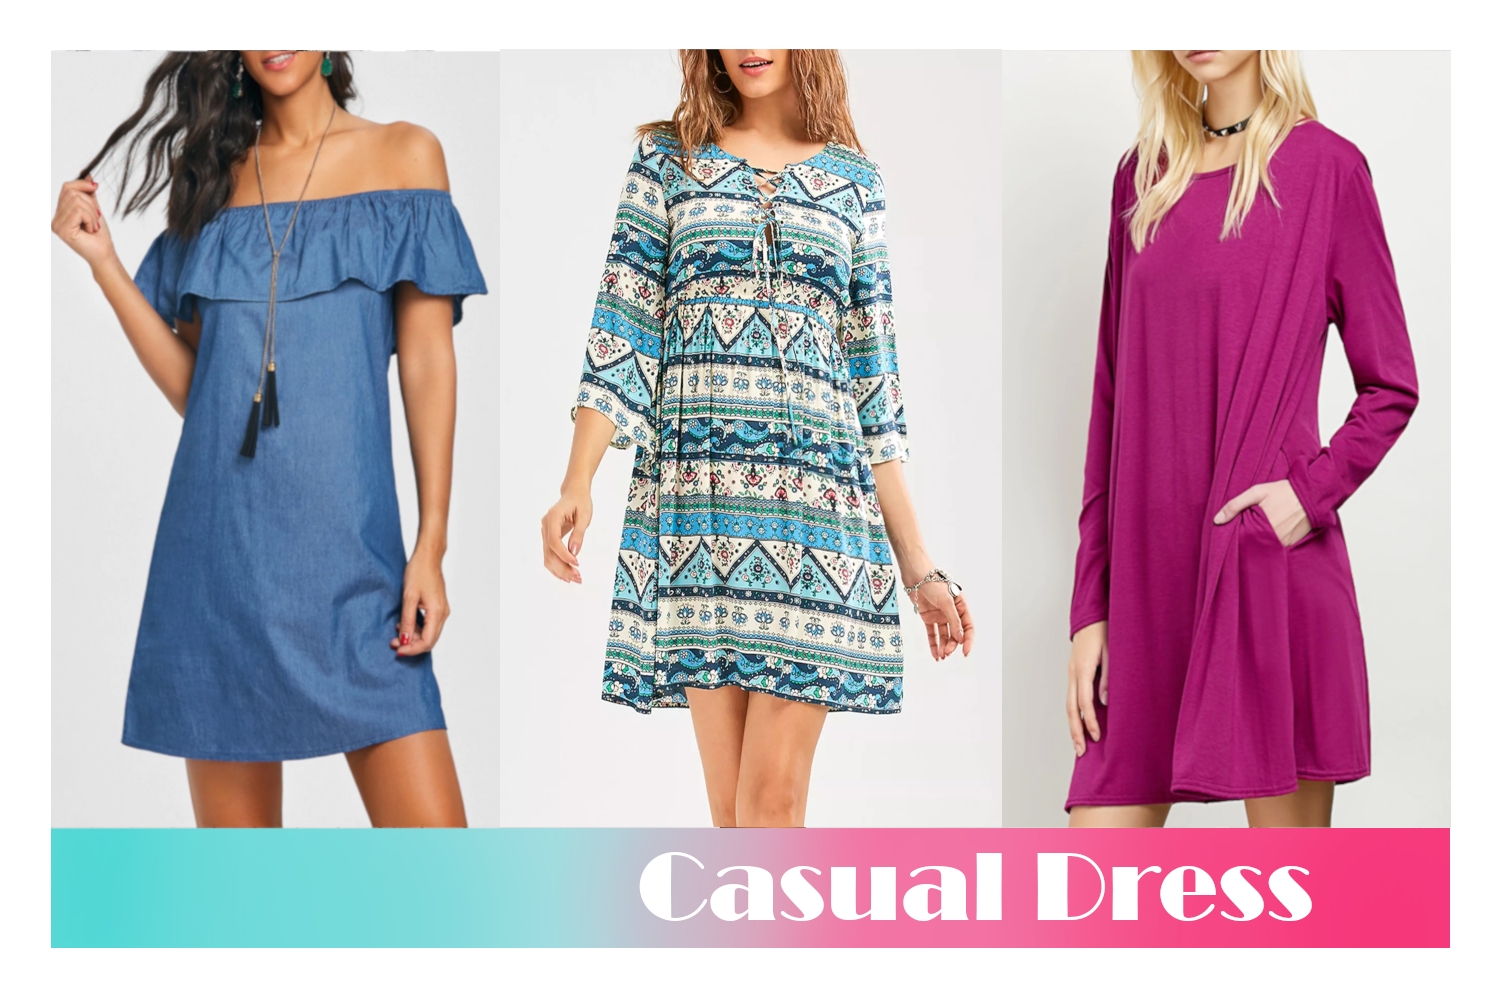 fashion collage with three casual dresses for summer